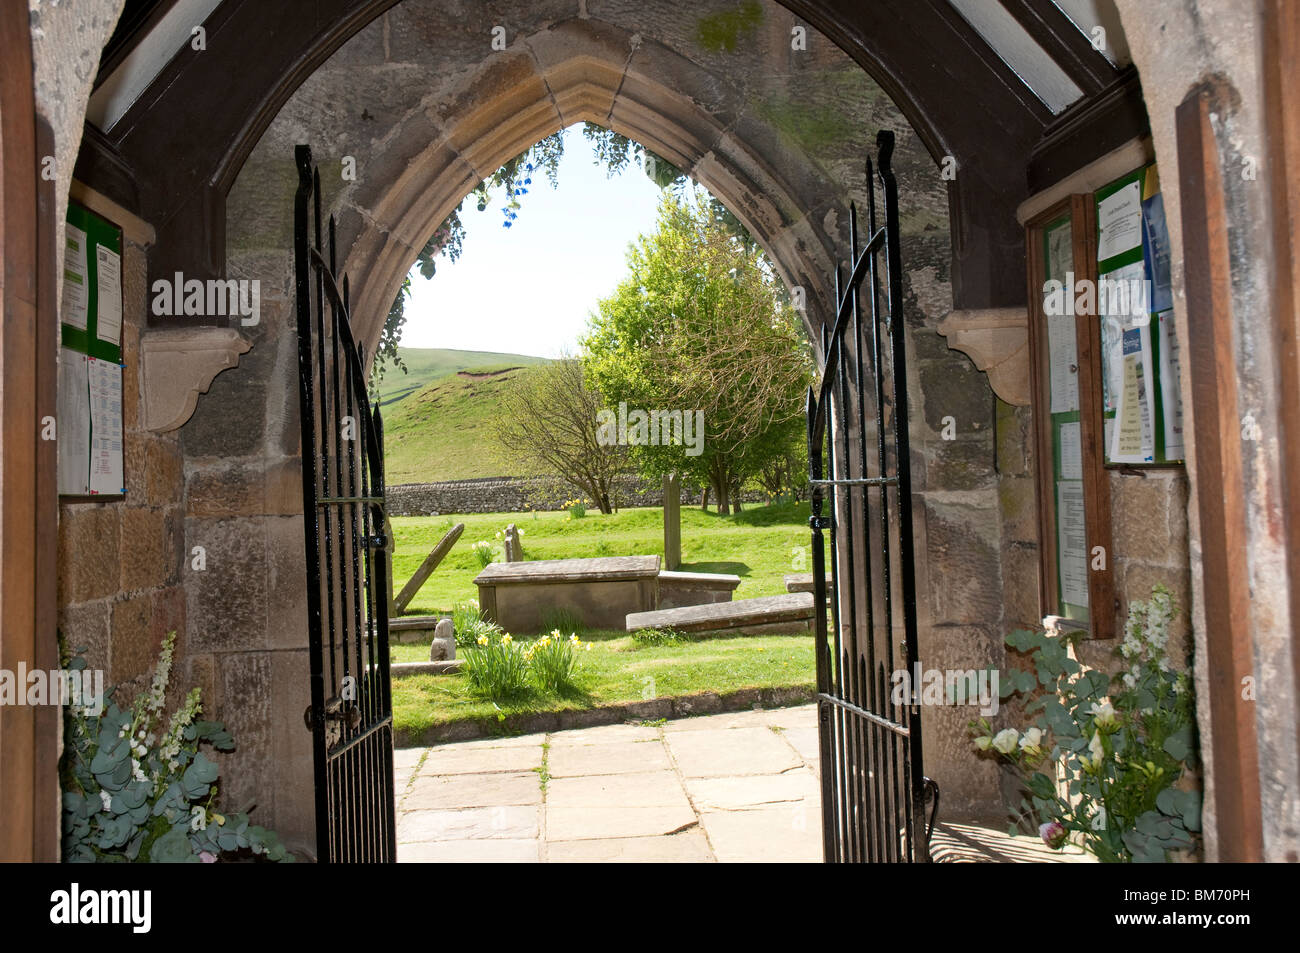 The church of St Michael and all Angels in Linton near the village of Grassington in the Yorkshire Dales Stock Photo